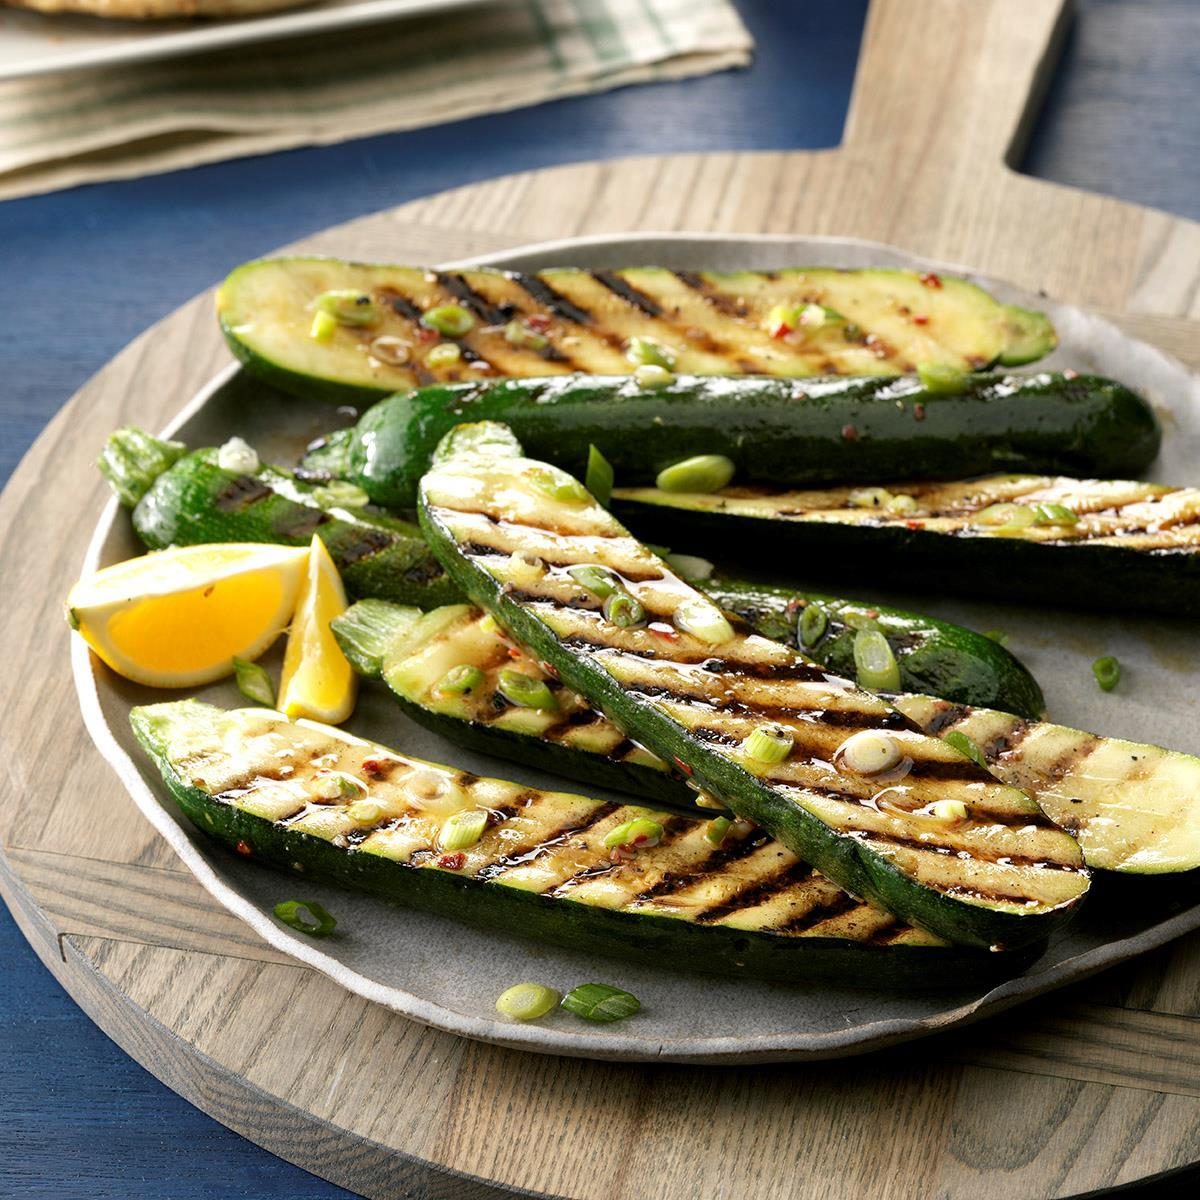 Grilled Zucchini With Onions Exps Sdjj19 124903 C02 07 5b 13